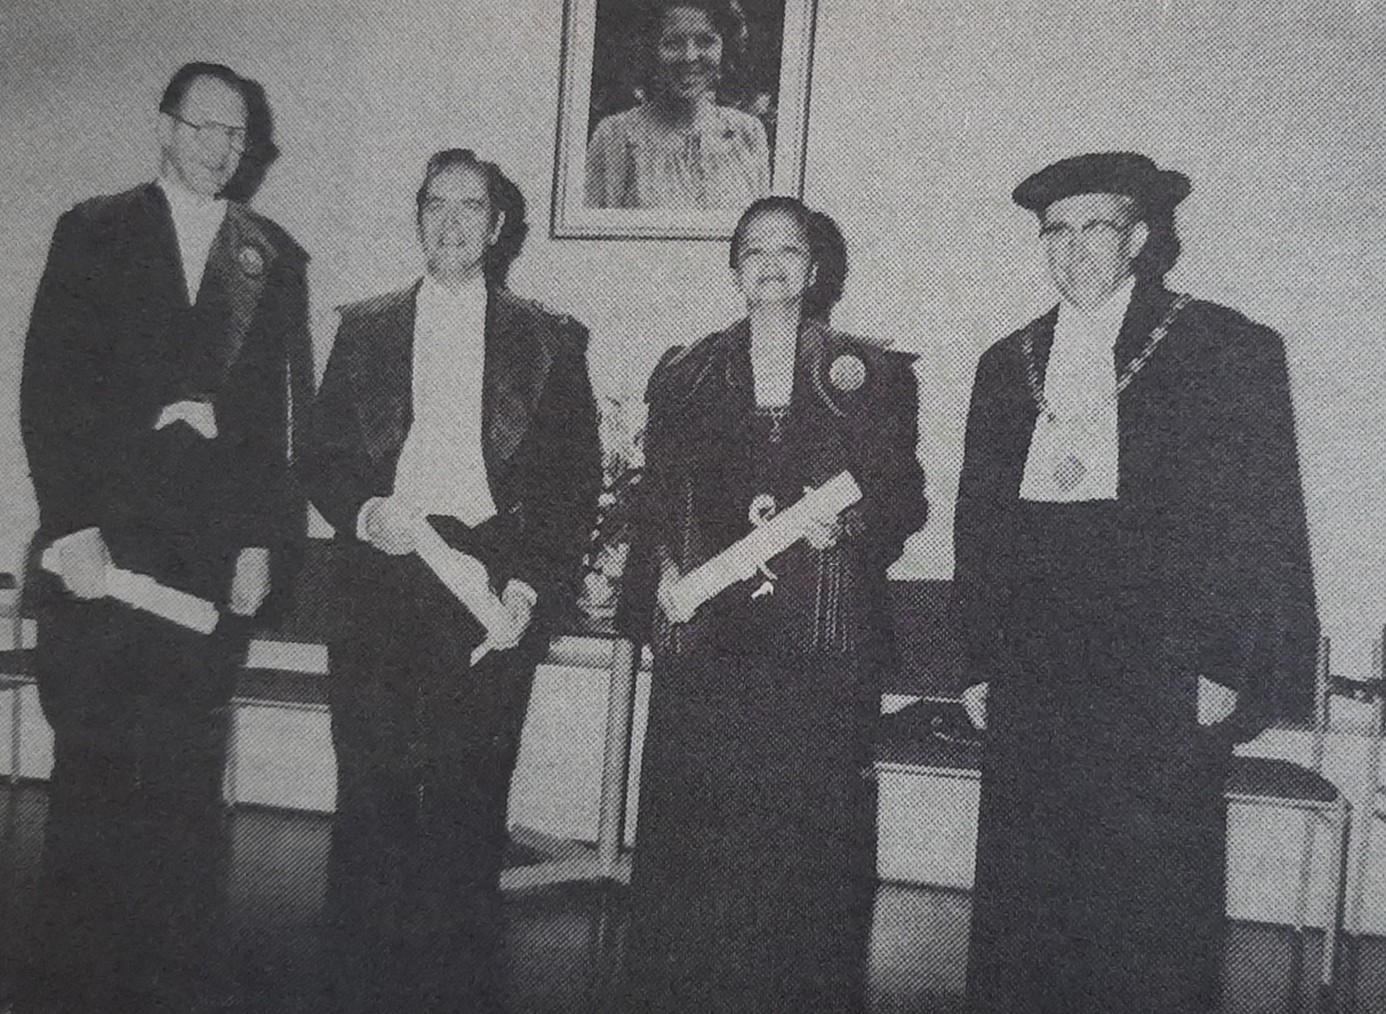 Prof. Dr Gelia T. Castillo, after promotion to WU honorary doctor on WU Dies Natalis on 9 March 1983, together with Rector Prof. Dr C.C. Oosterlee and the two other honorary doctors, H. de Bakker and J. Gremmen. Source: Wagenings Hogeschoolblad 11 March 1983, p. 4; photographer: Rein Heij